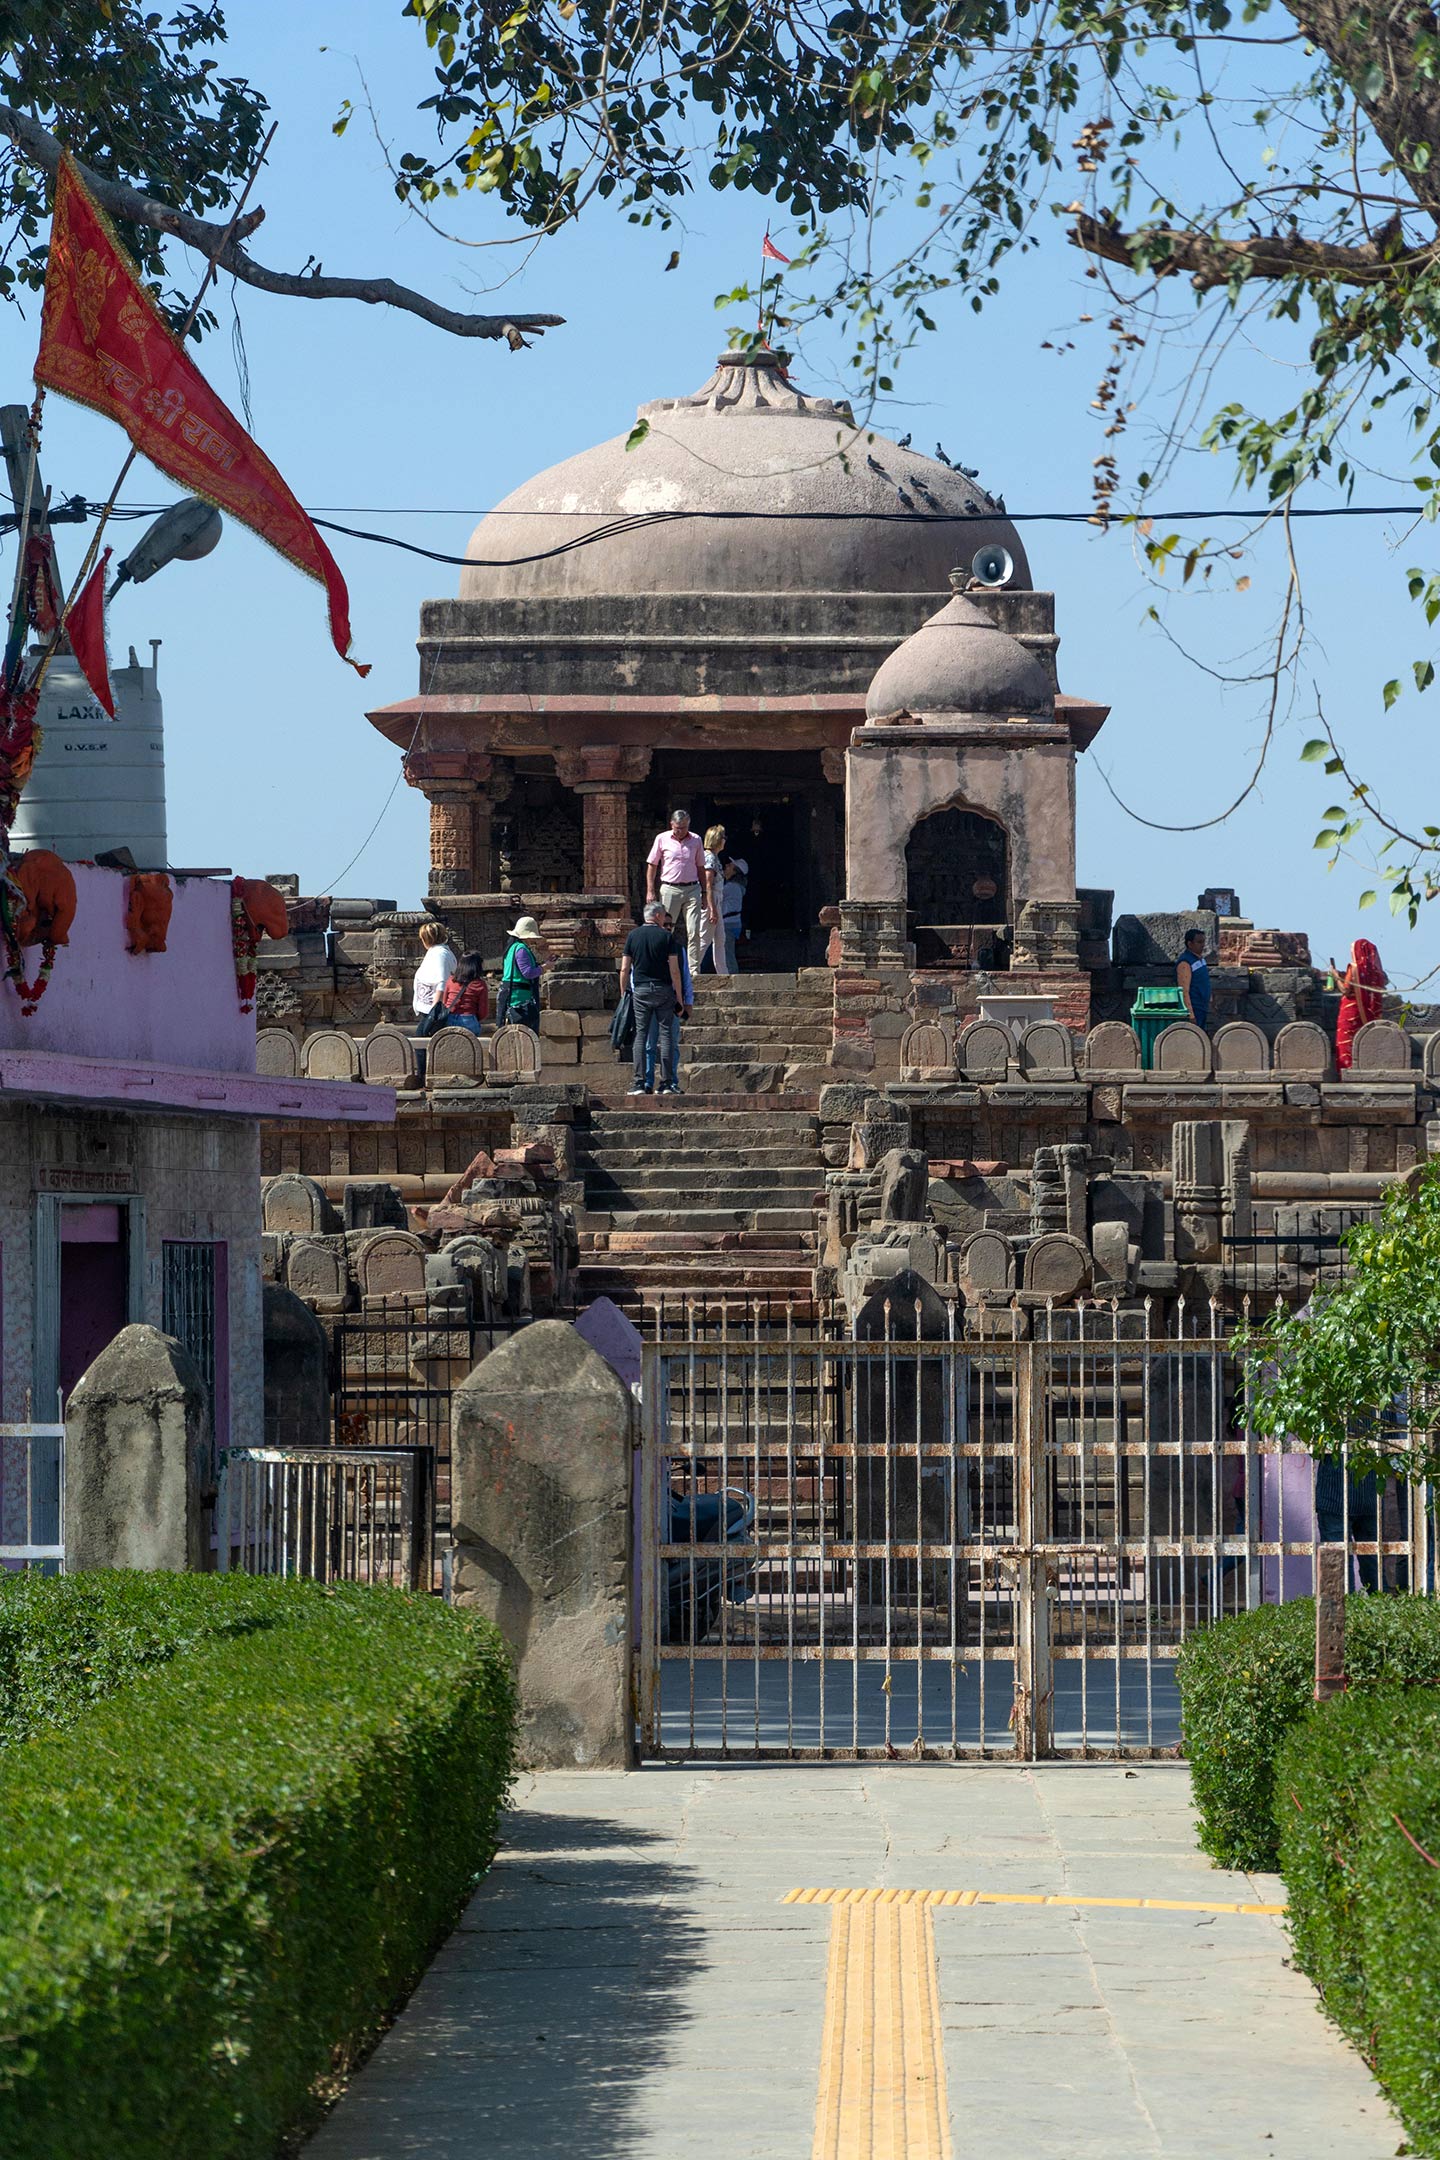 Front view of the Harshatmata Temple with steps leading to the temple from the ground level. Also seen is the smaller Nandi shrine in front of the main temple.